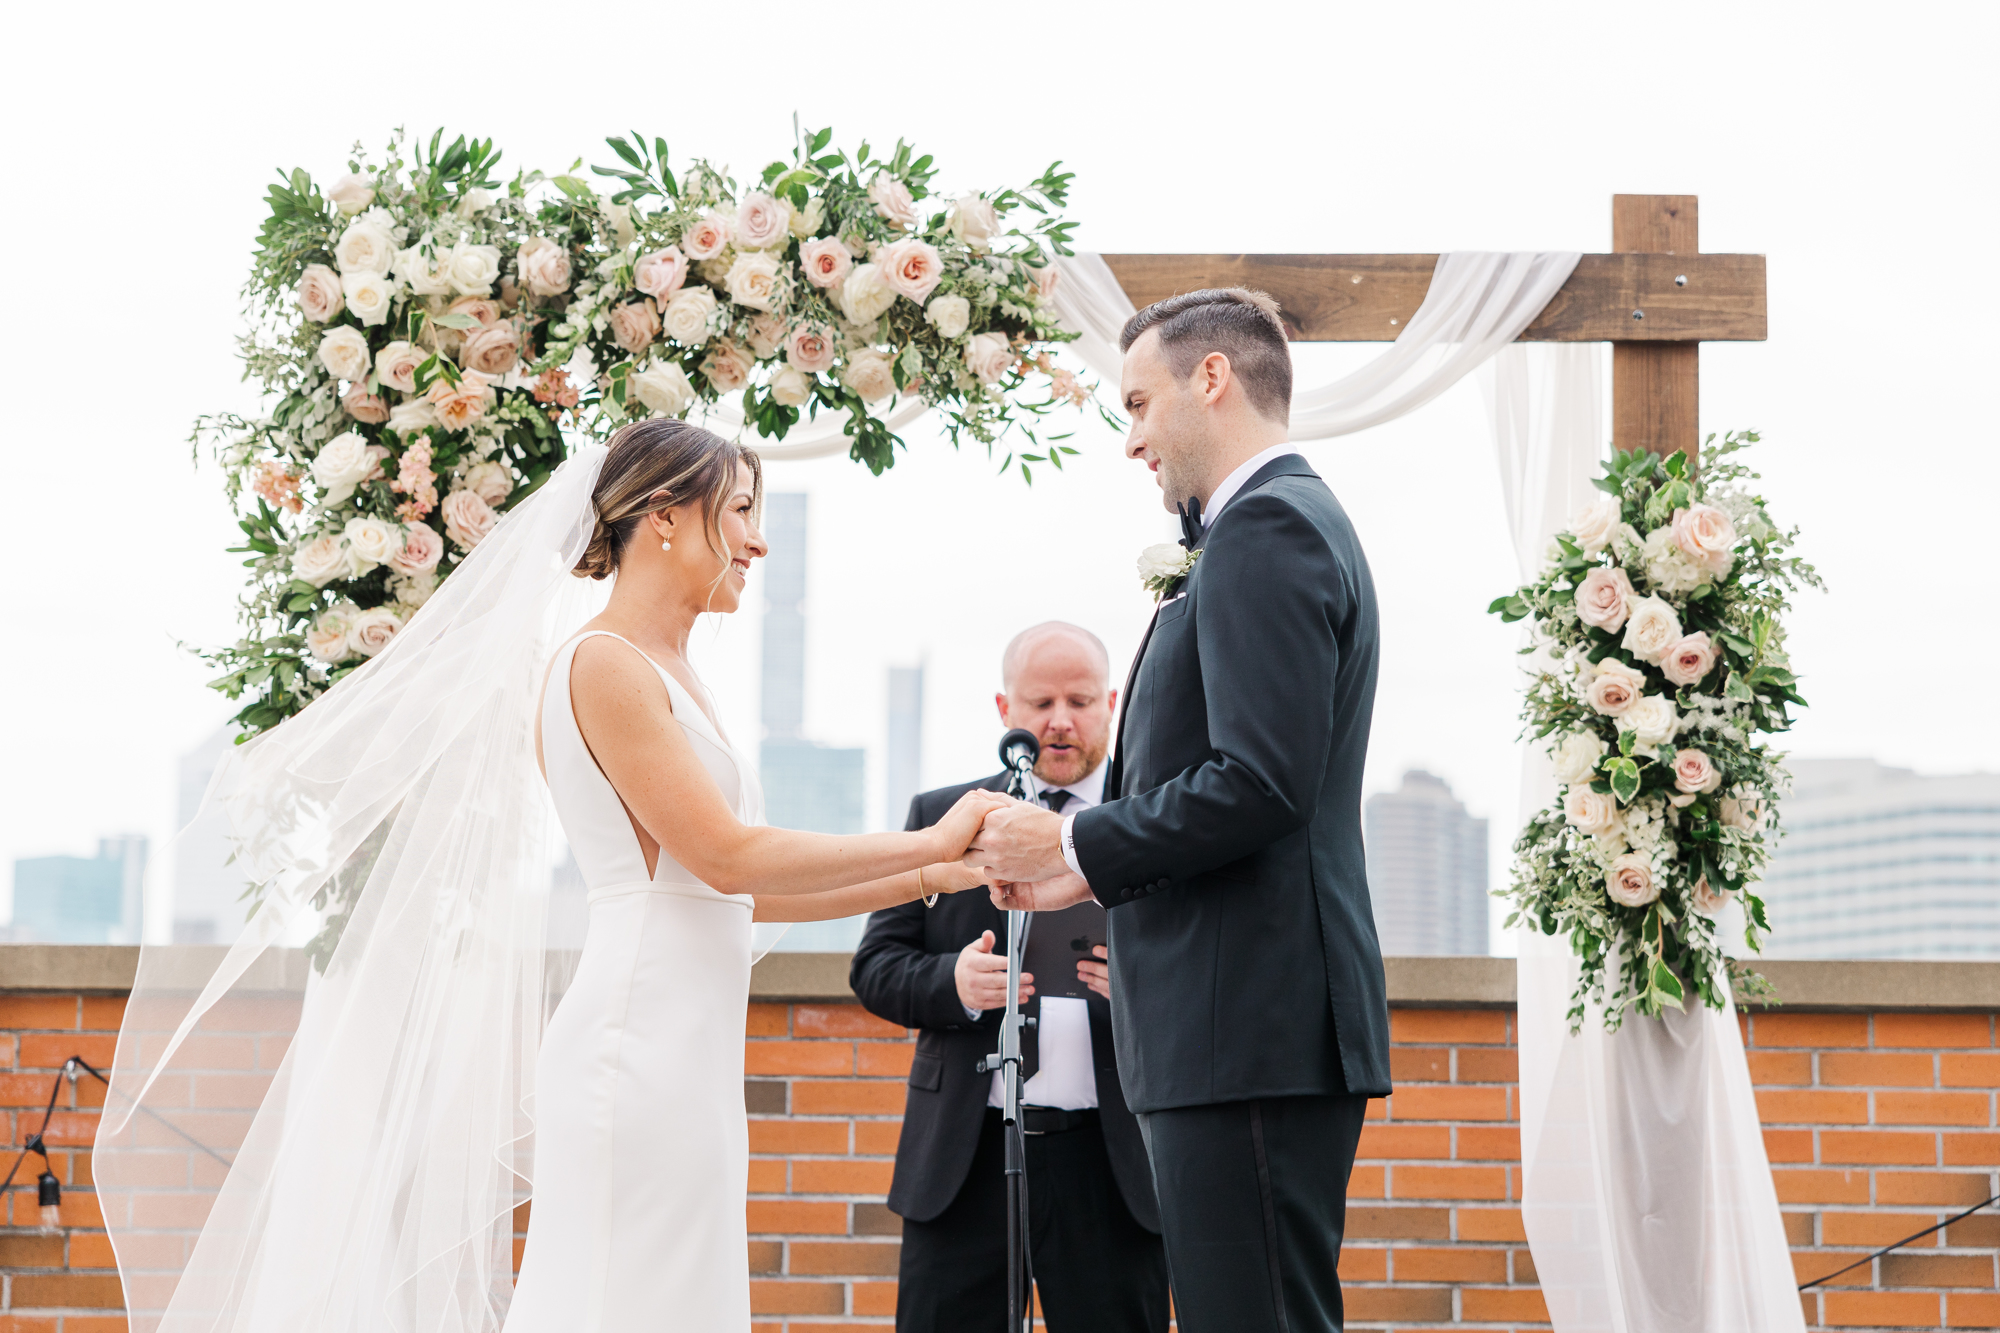 Radiant Wedding at The Bordone, Queens NY